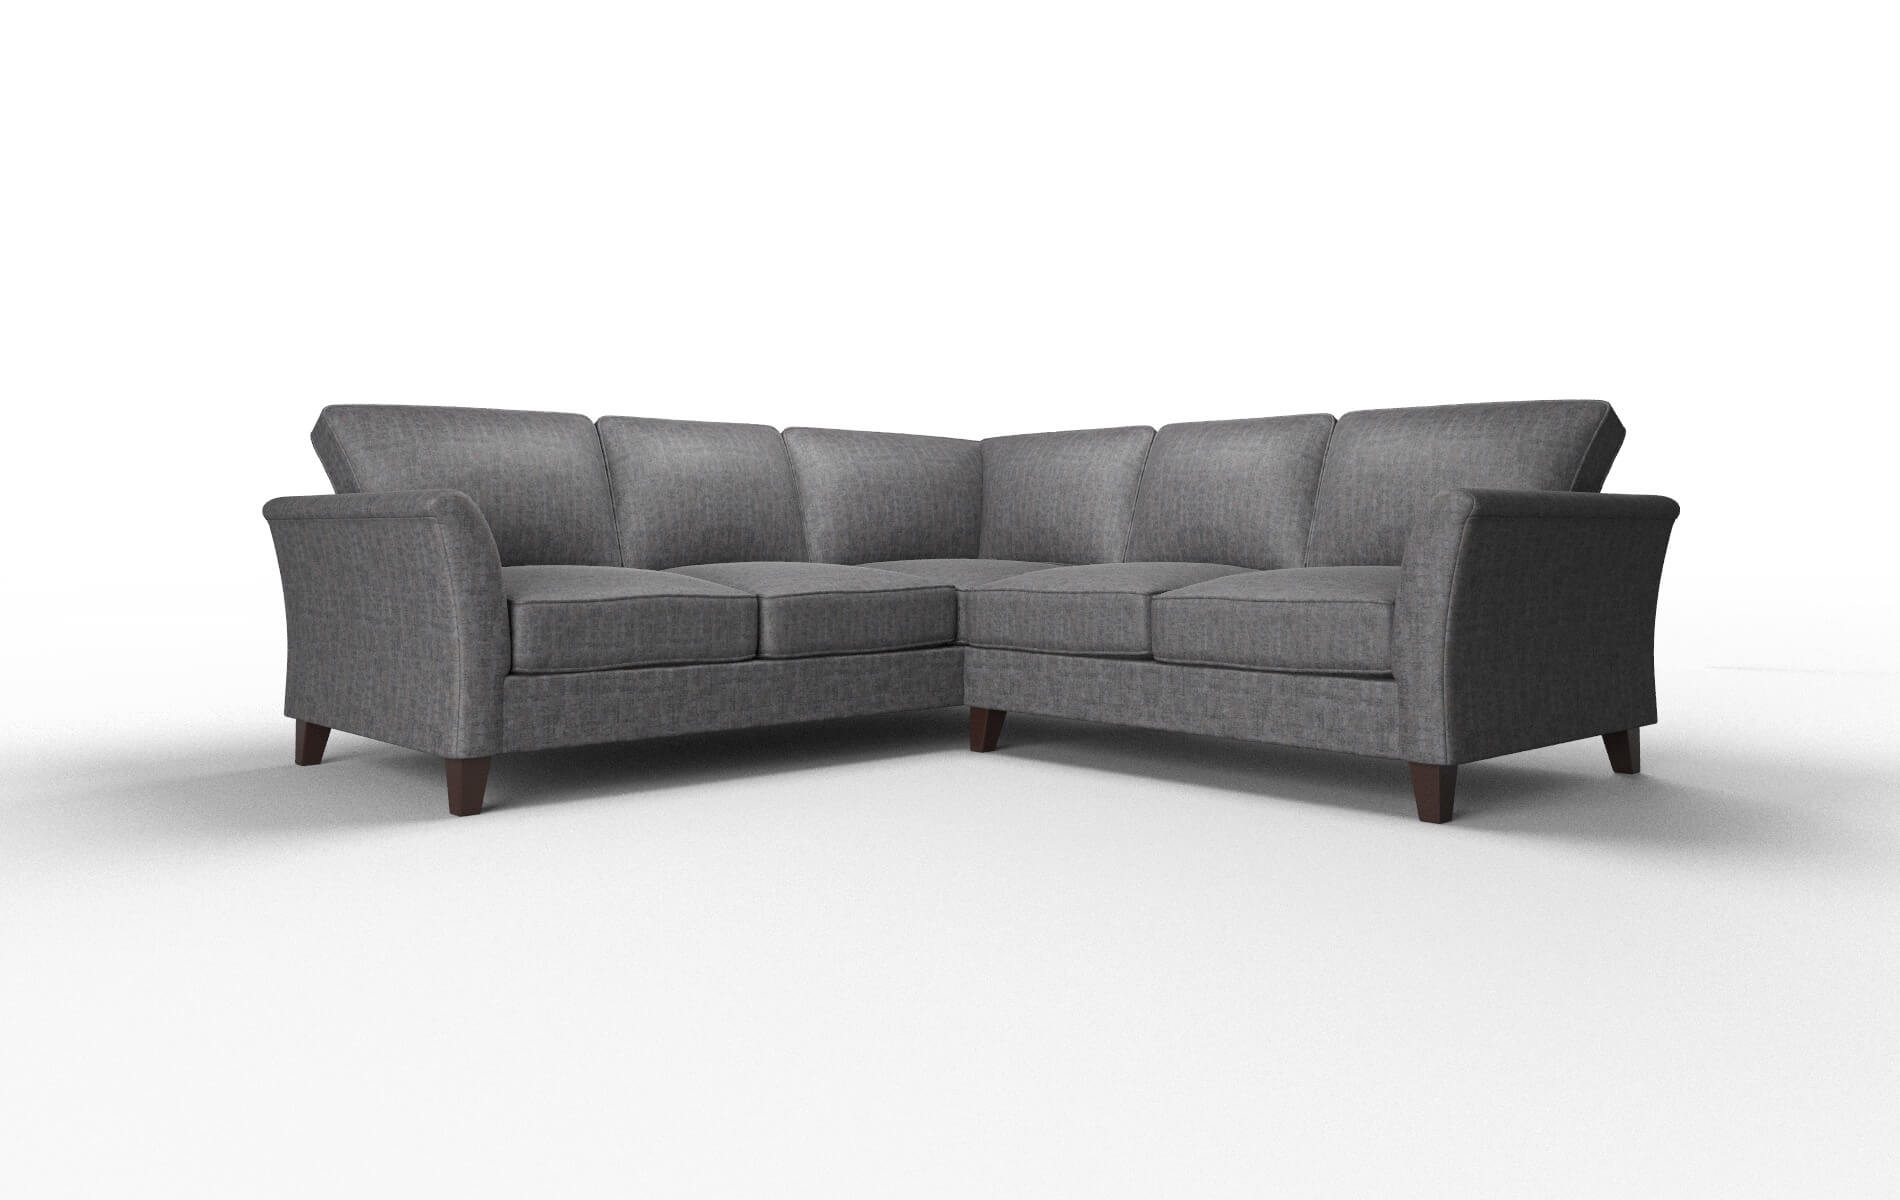 Cologne Marcy Baltic Sectional espresso legs